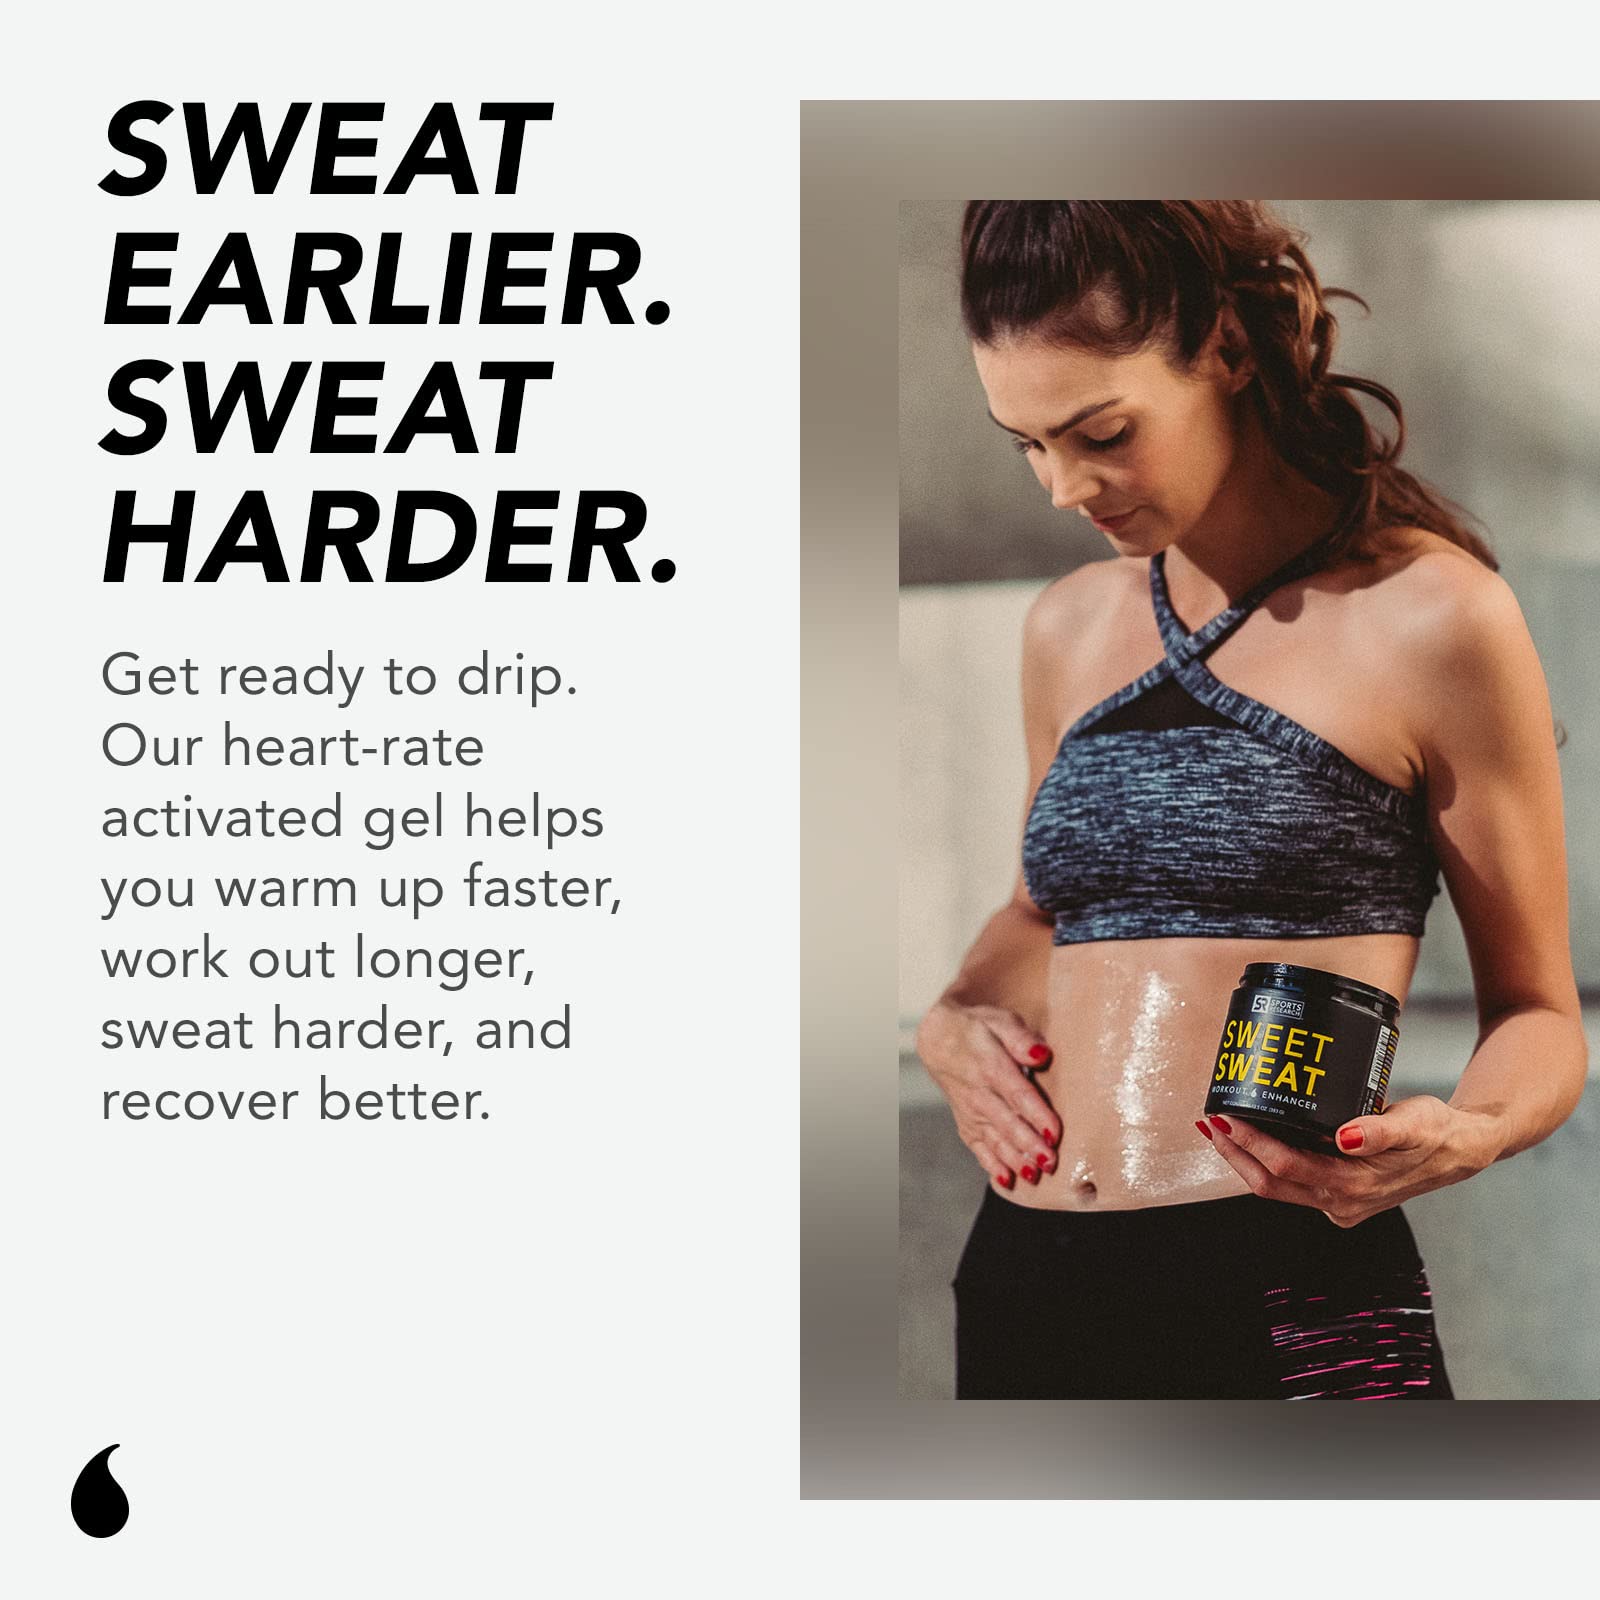 Sweet Sweat Workout Enhancer Gel - Makes You Sweat Harder and Faster, Helps Promote Water Weight Loss, Use with Sweet Sweat Waist Trimmer Sauna Suit - 13.5oz Jar